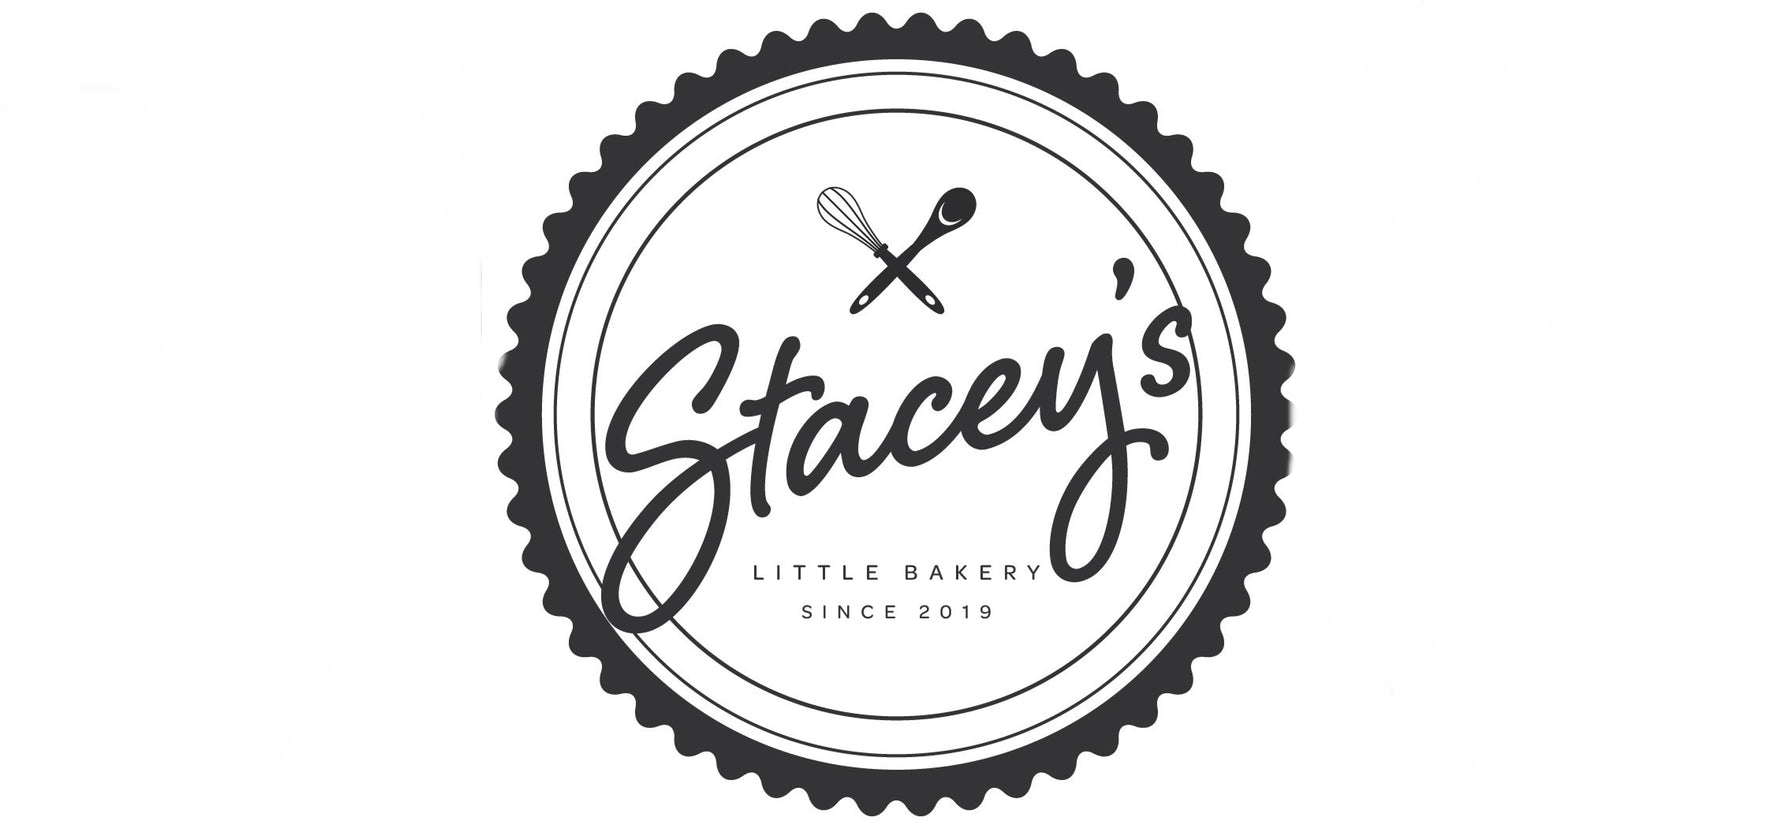 Stacey's Little Bakery